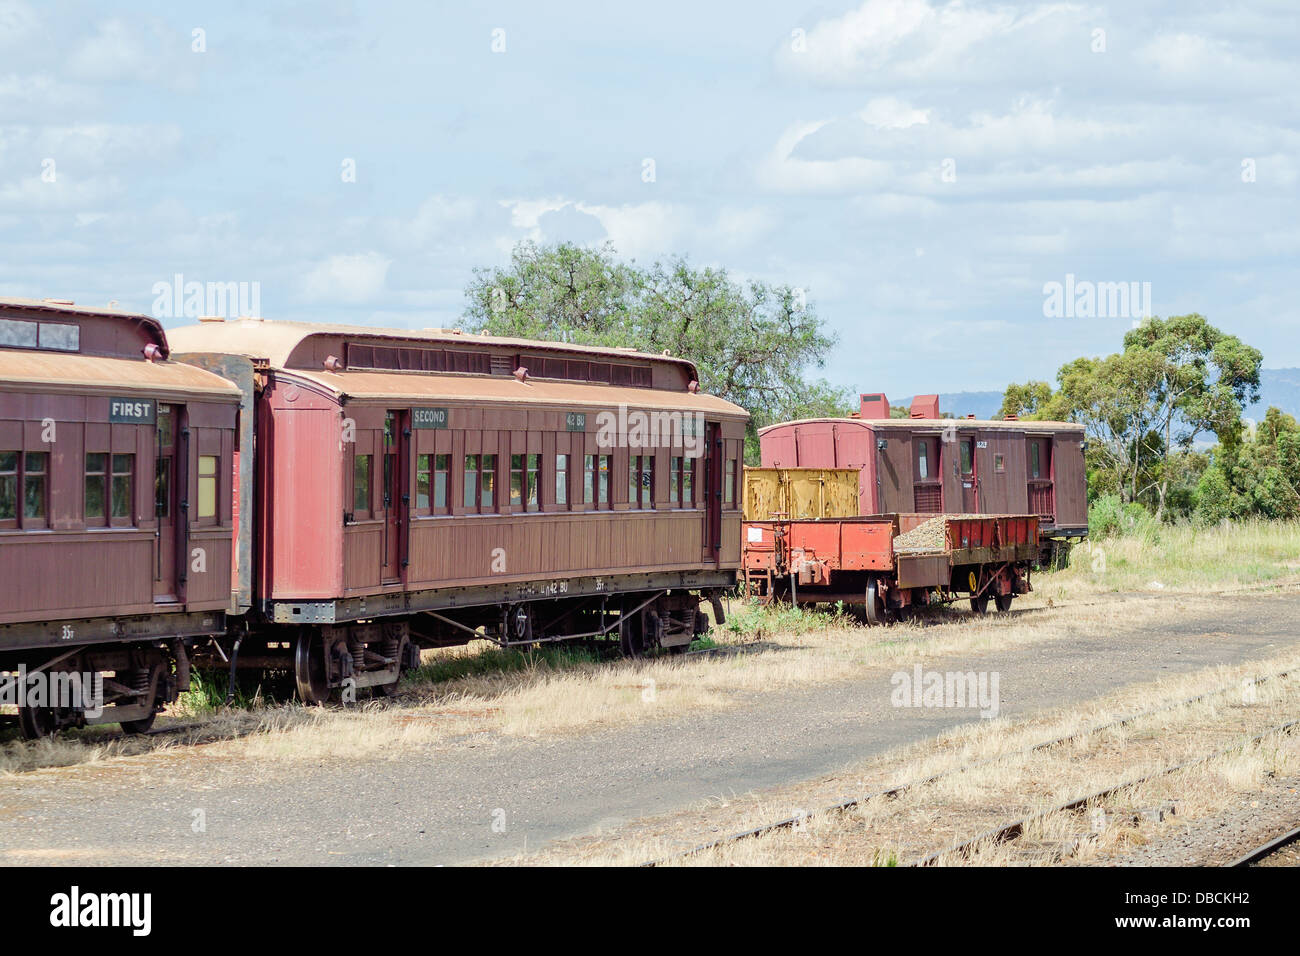 Old train carriages at Maldon railway station in rural Victoria Australia Stock Photo